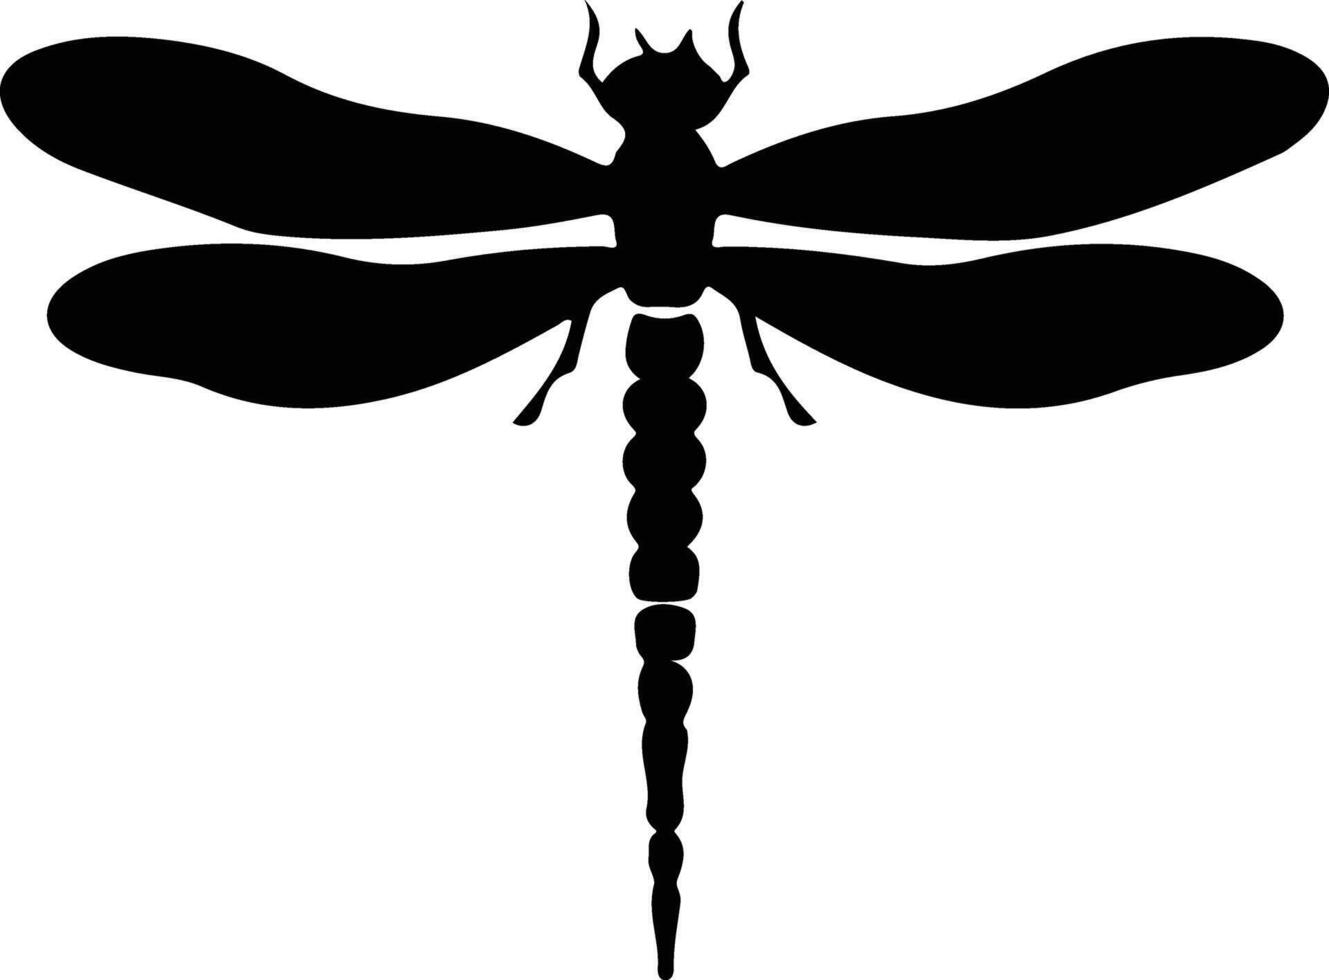 dragonfly black silhouette vector